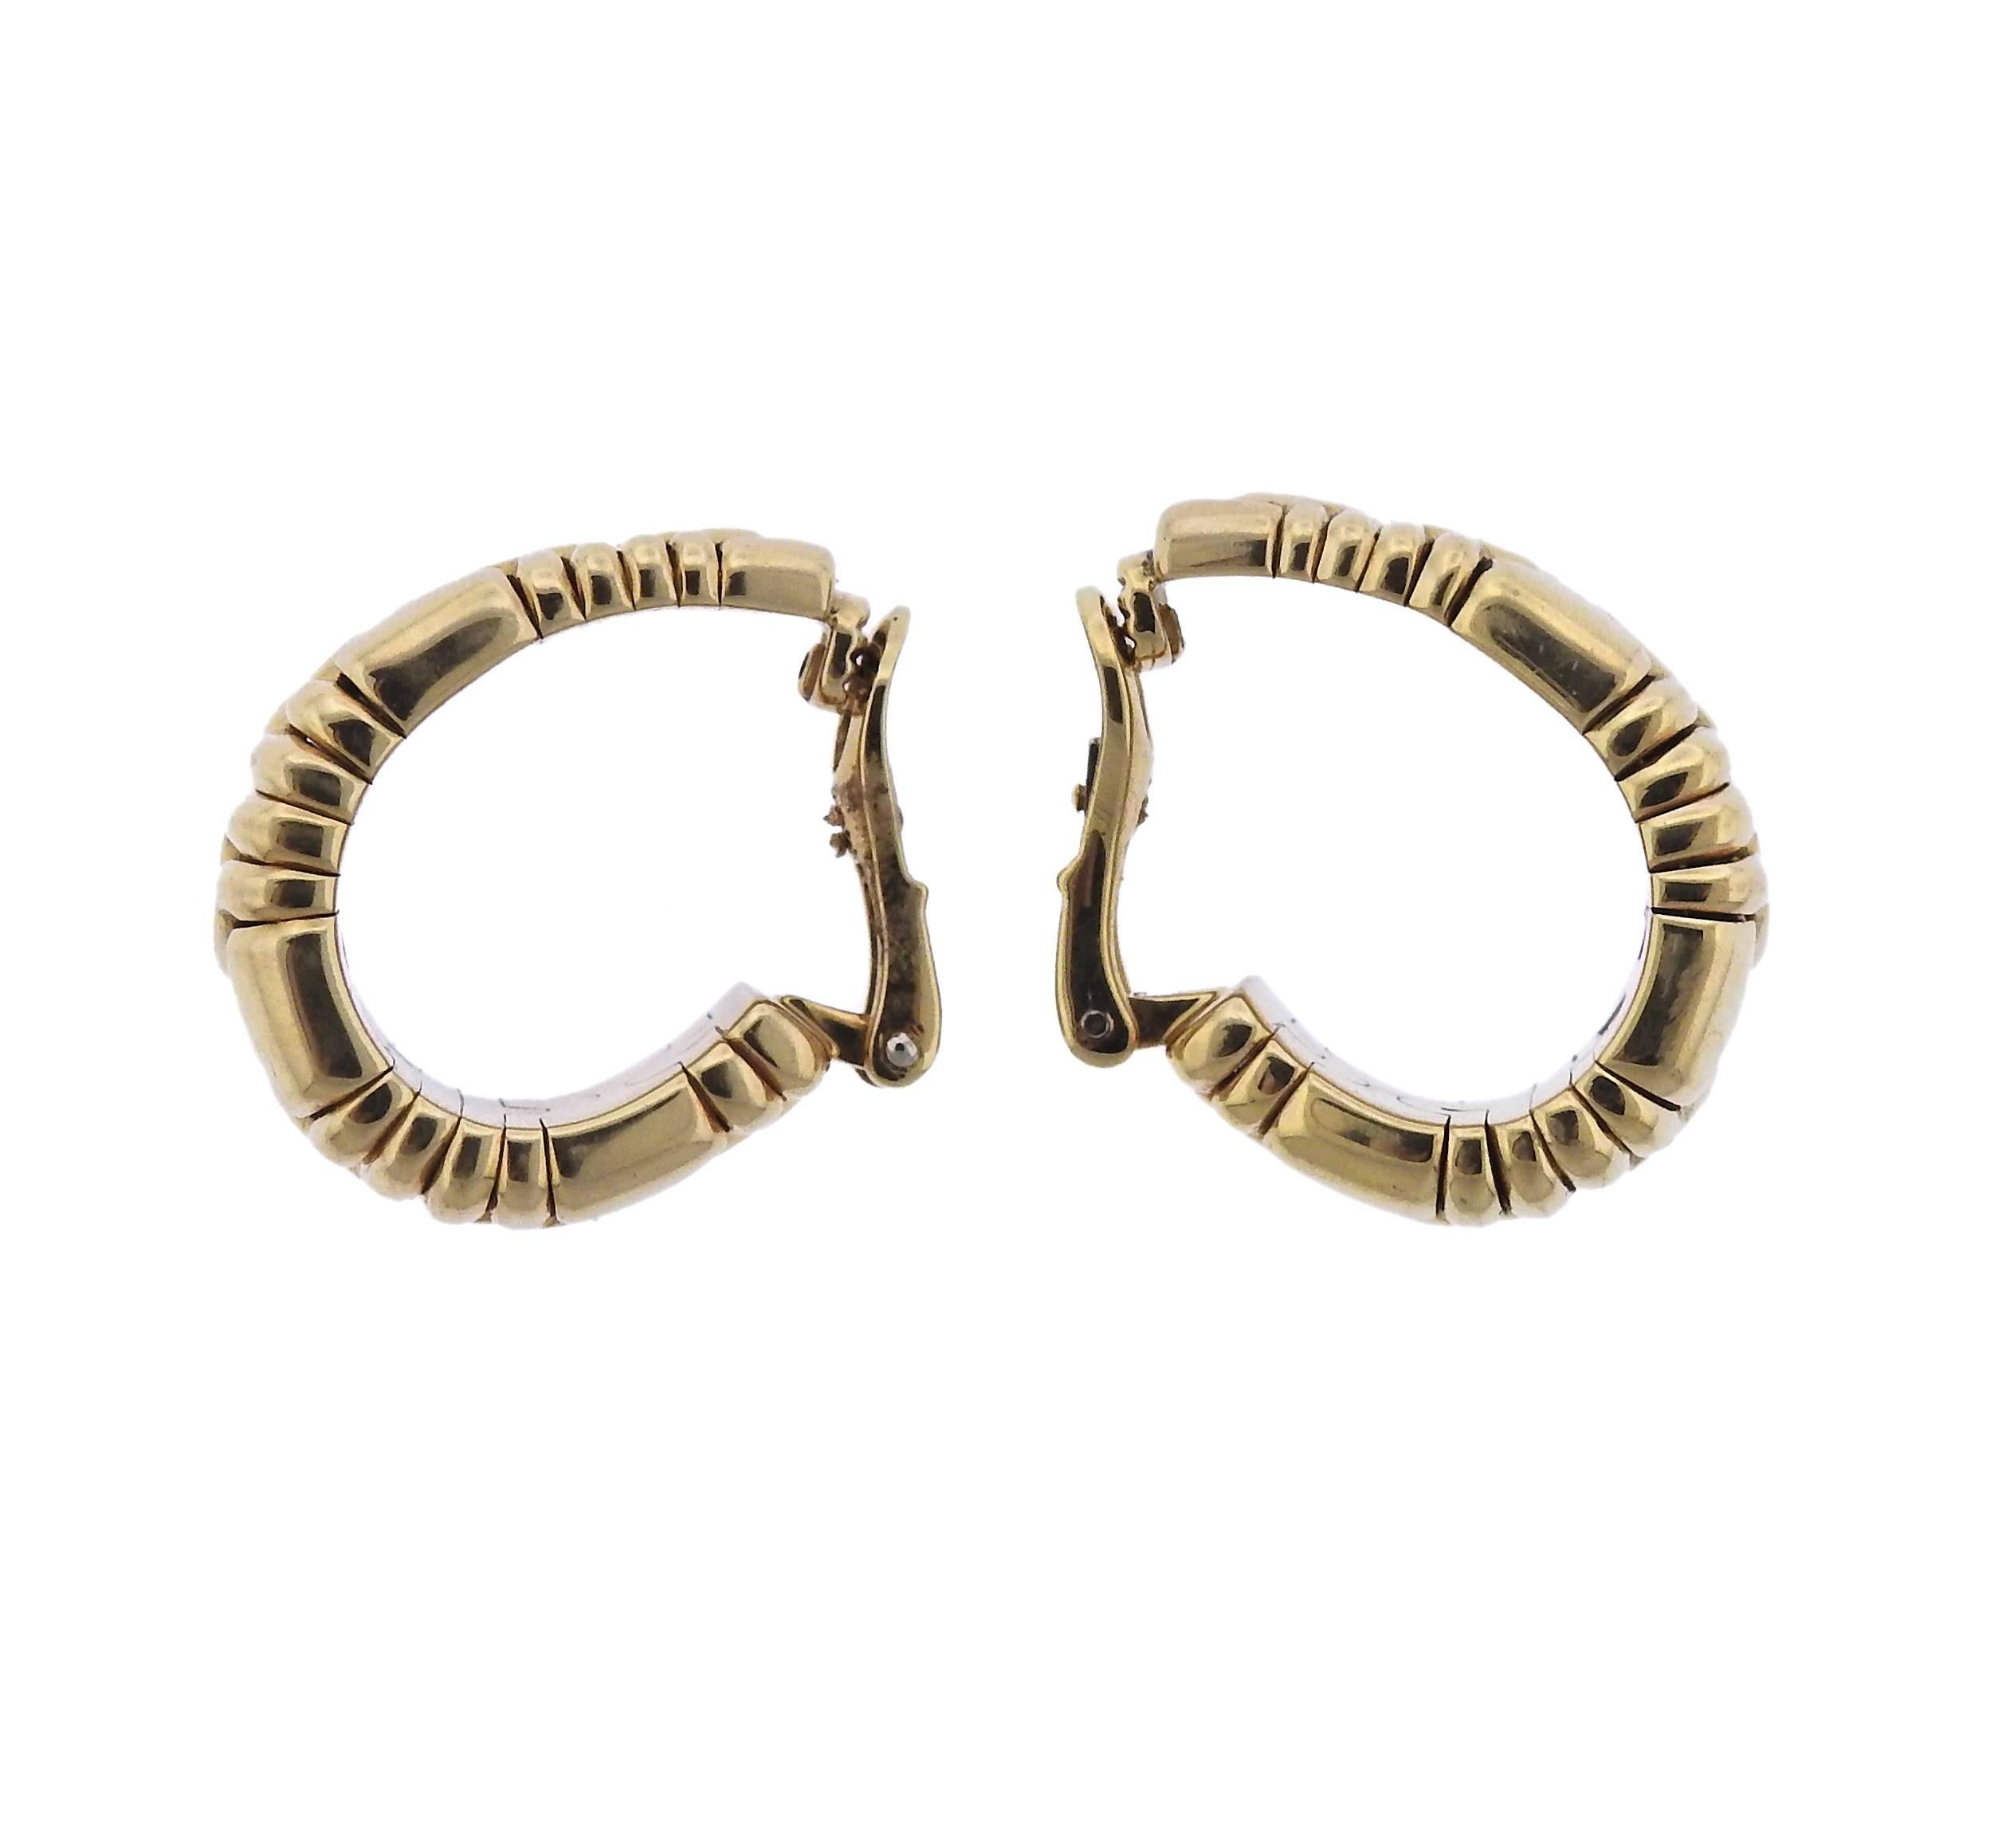 Large 18k yellow gold hoop earrings by Bulgari from Parentesi collection. Earrings measure 29mm x 14mm at widest points. Marked Bvlgari, 750, Italy.  Earrings weigh 46.8 grams. 